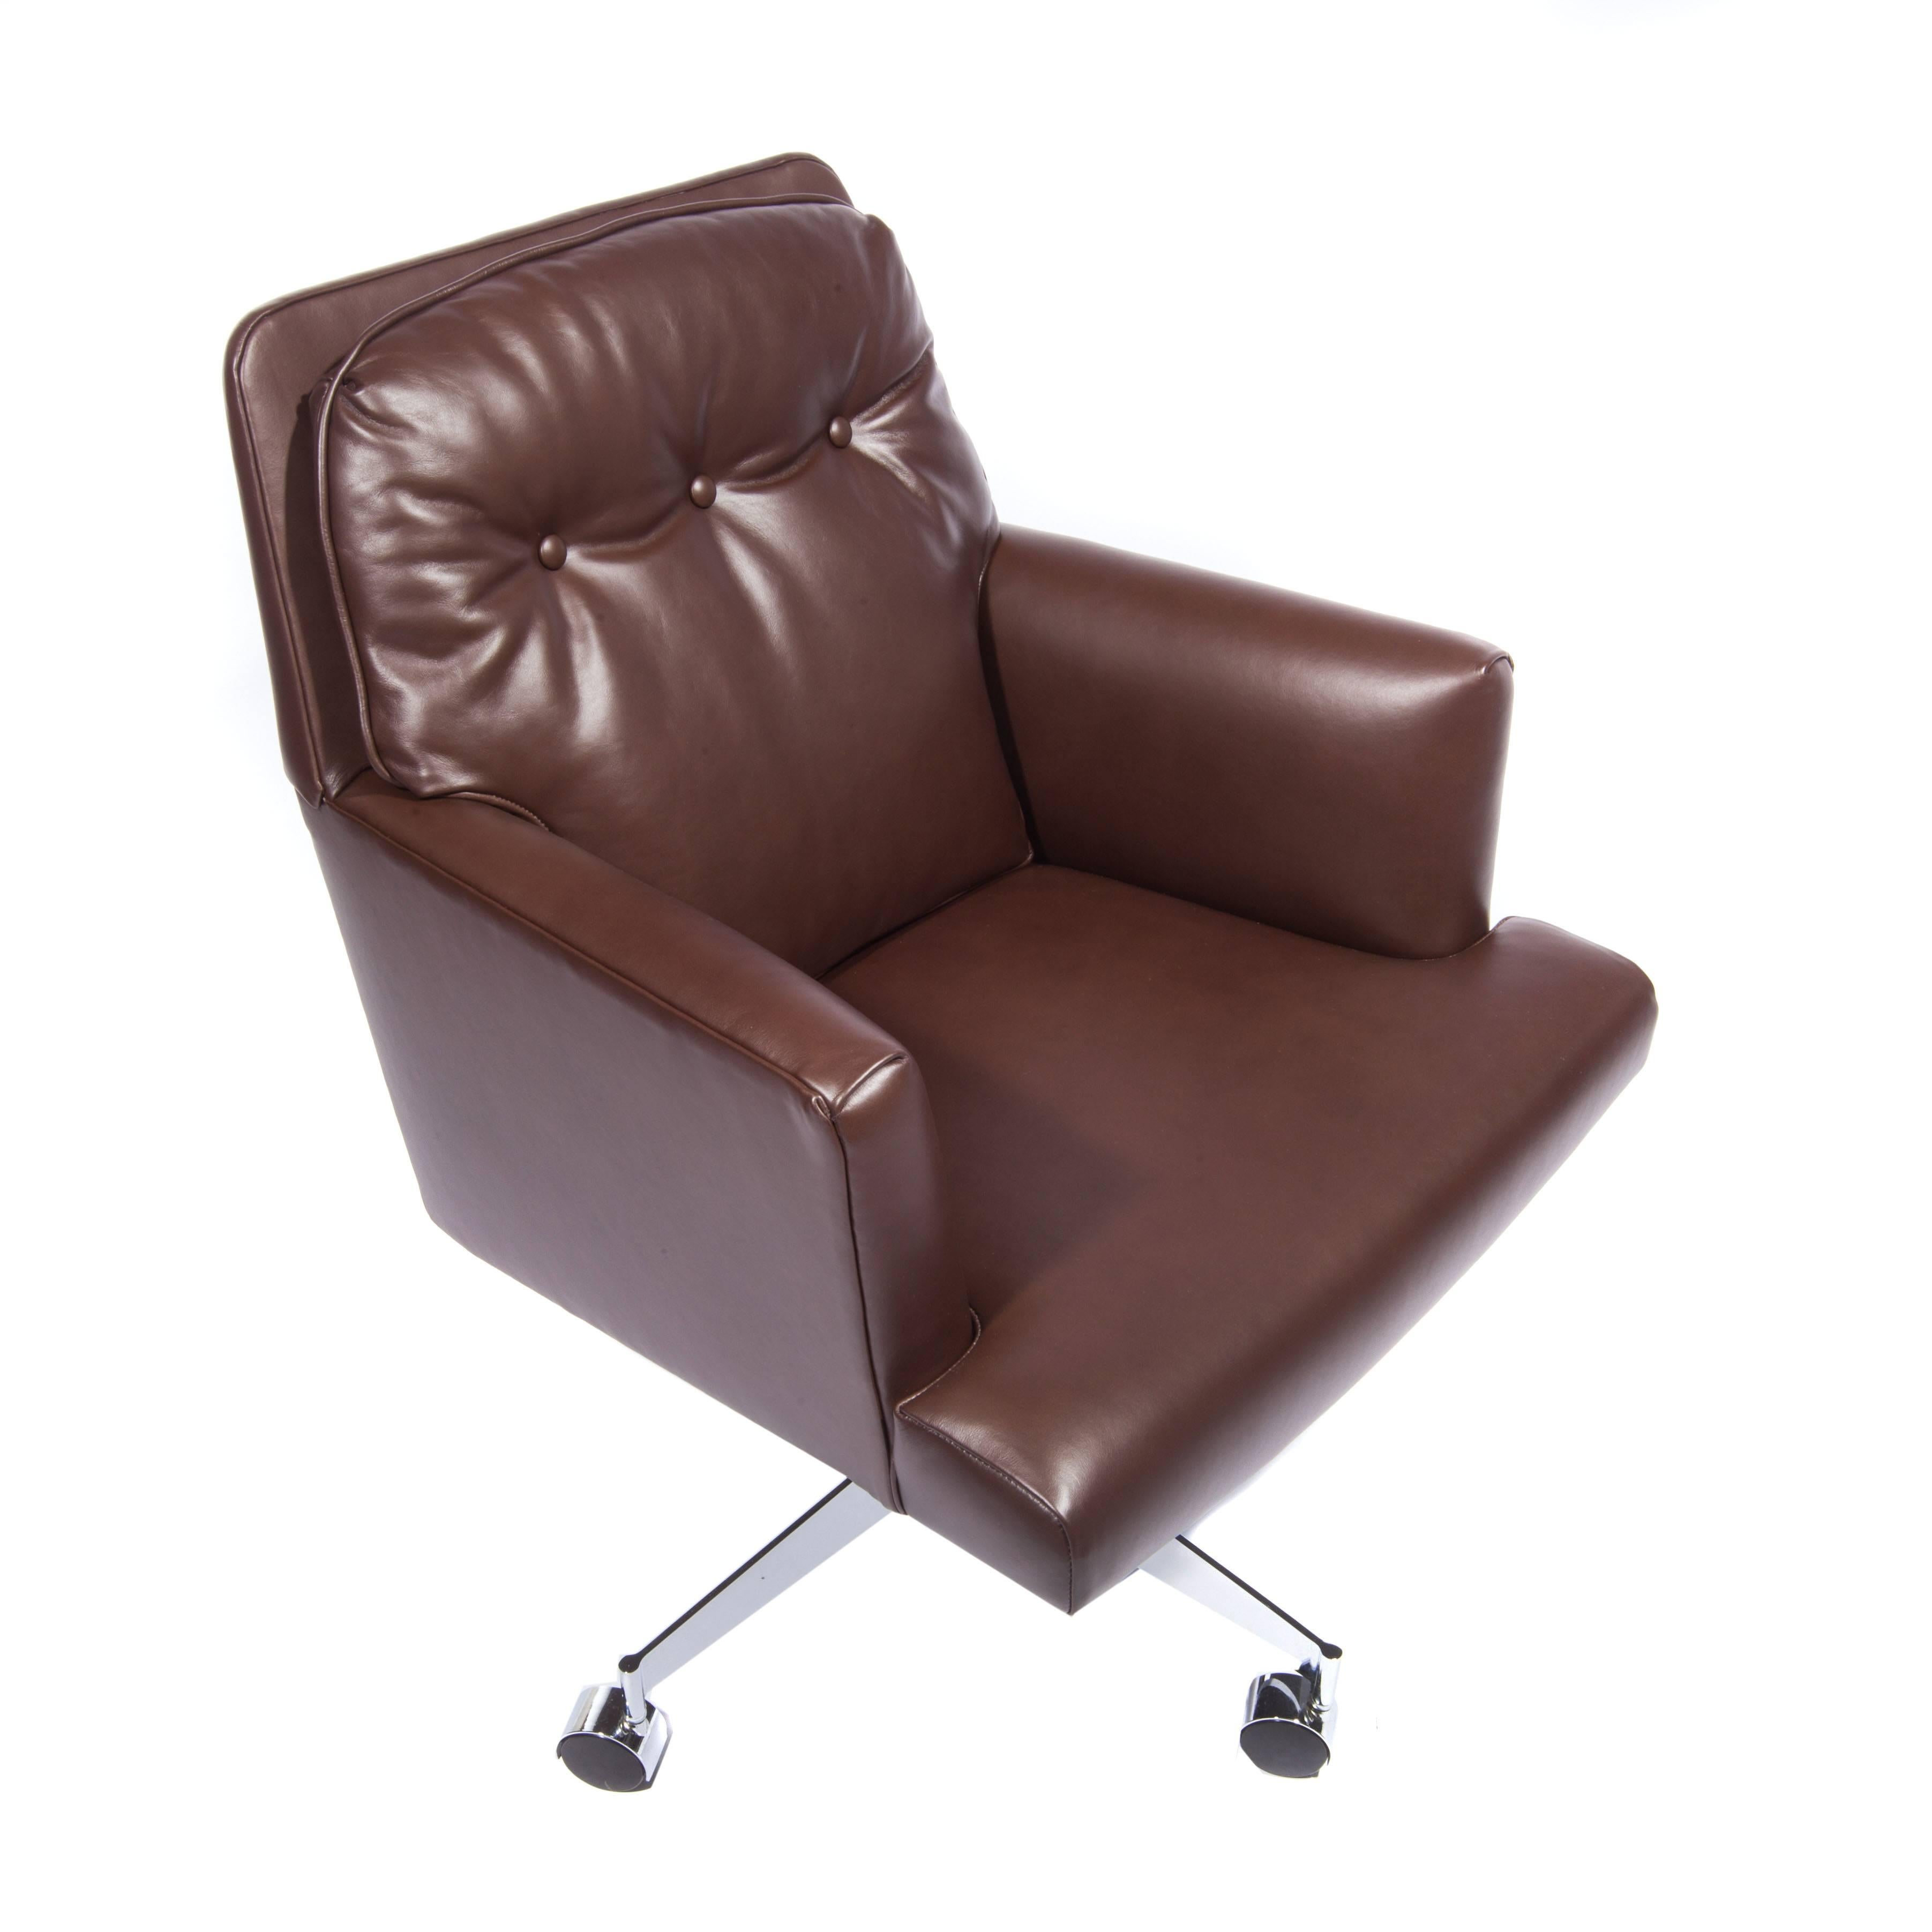 Swank, large and comfortable 1960s desk chair with a swivel base on four casters. Fully restored with new button-tufted chocolate-brown leather upholstery; re-chromed; new casters. 

